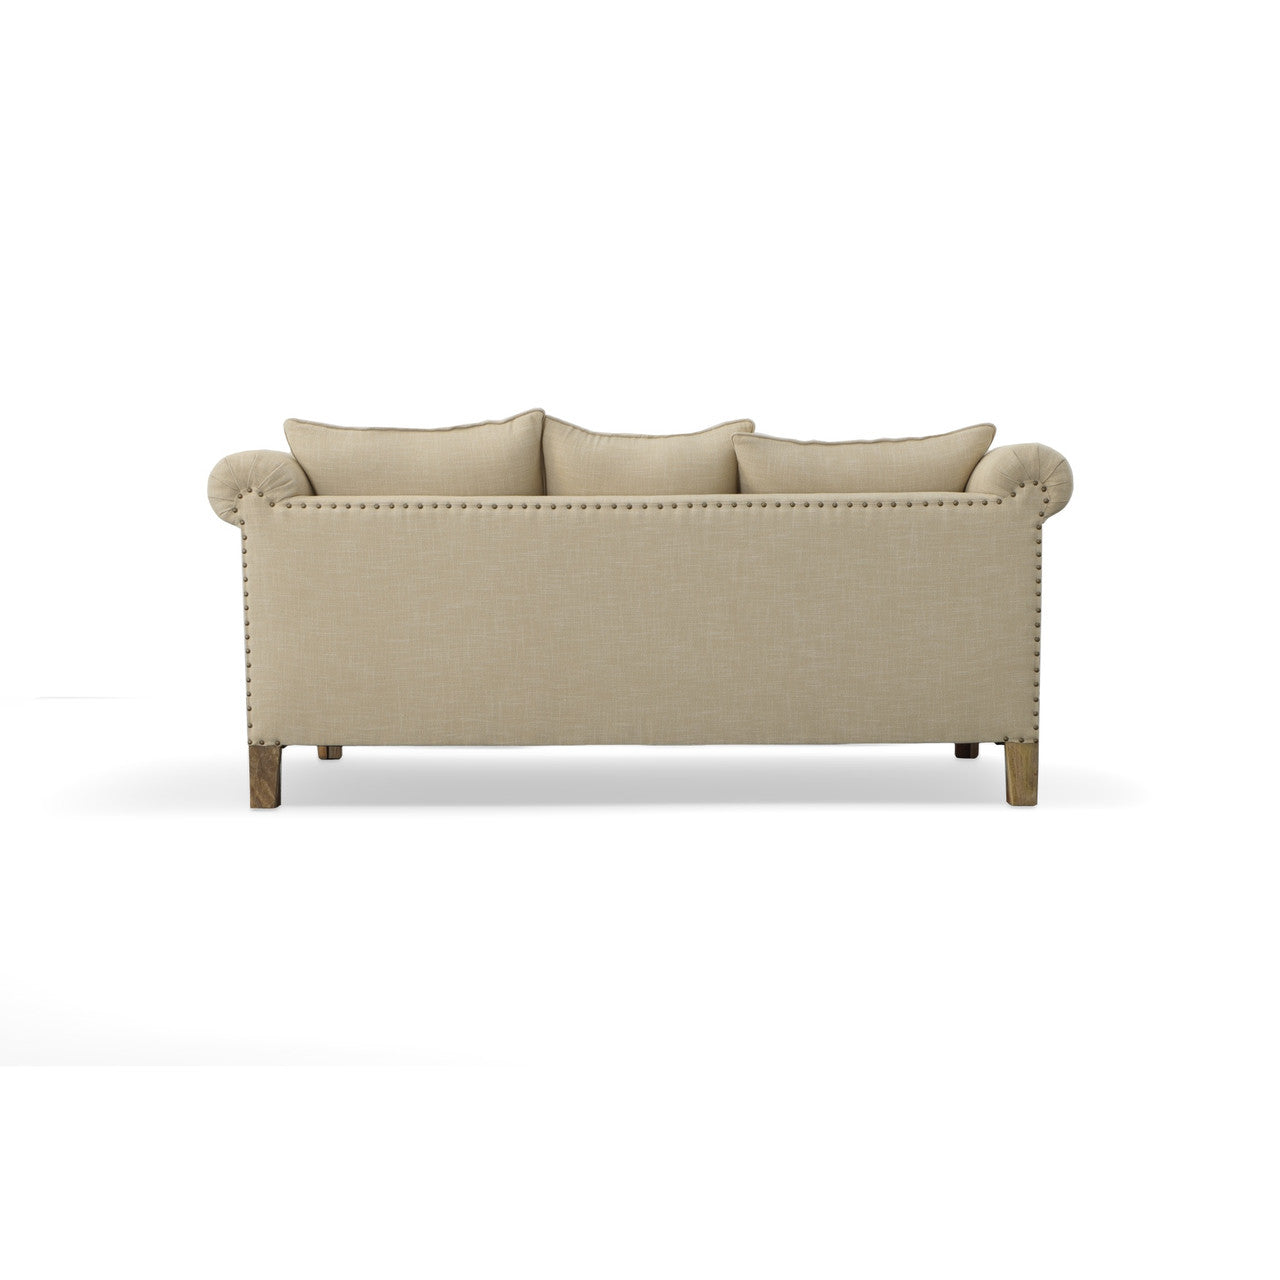 Mango Wood Solid Parquet and Linen Sofa 72 Inches